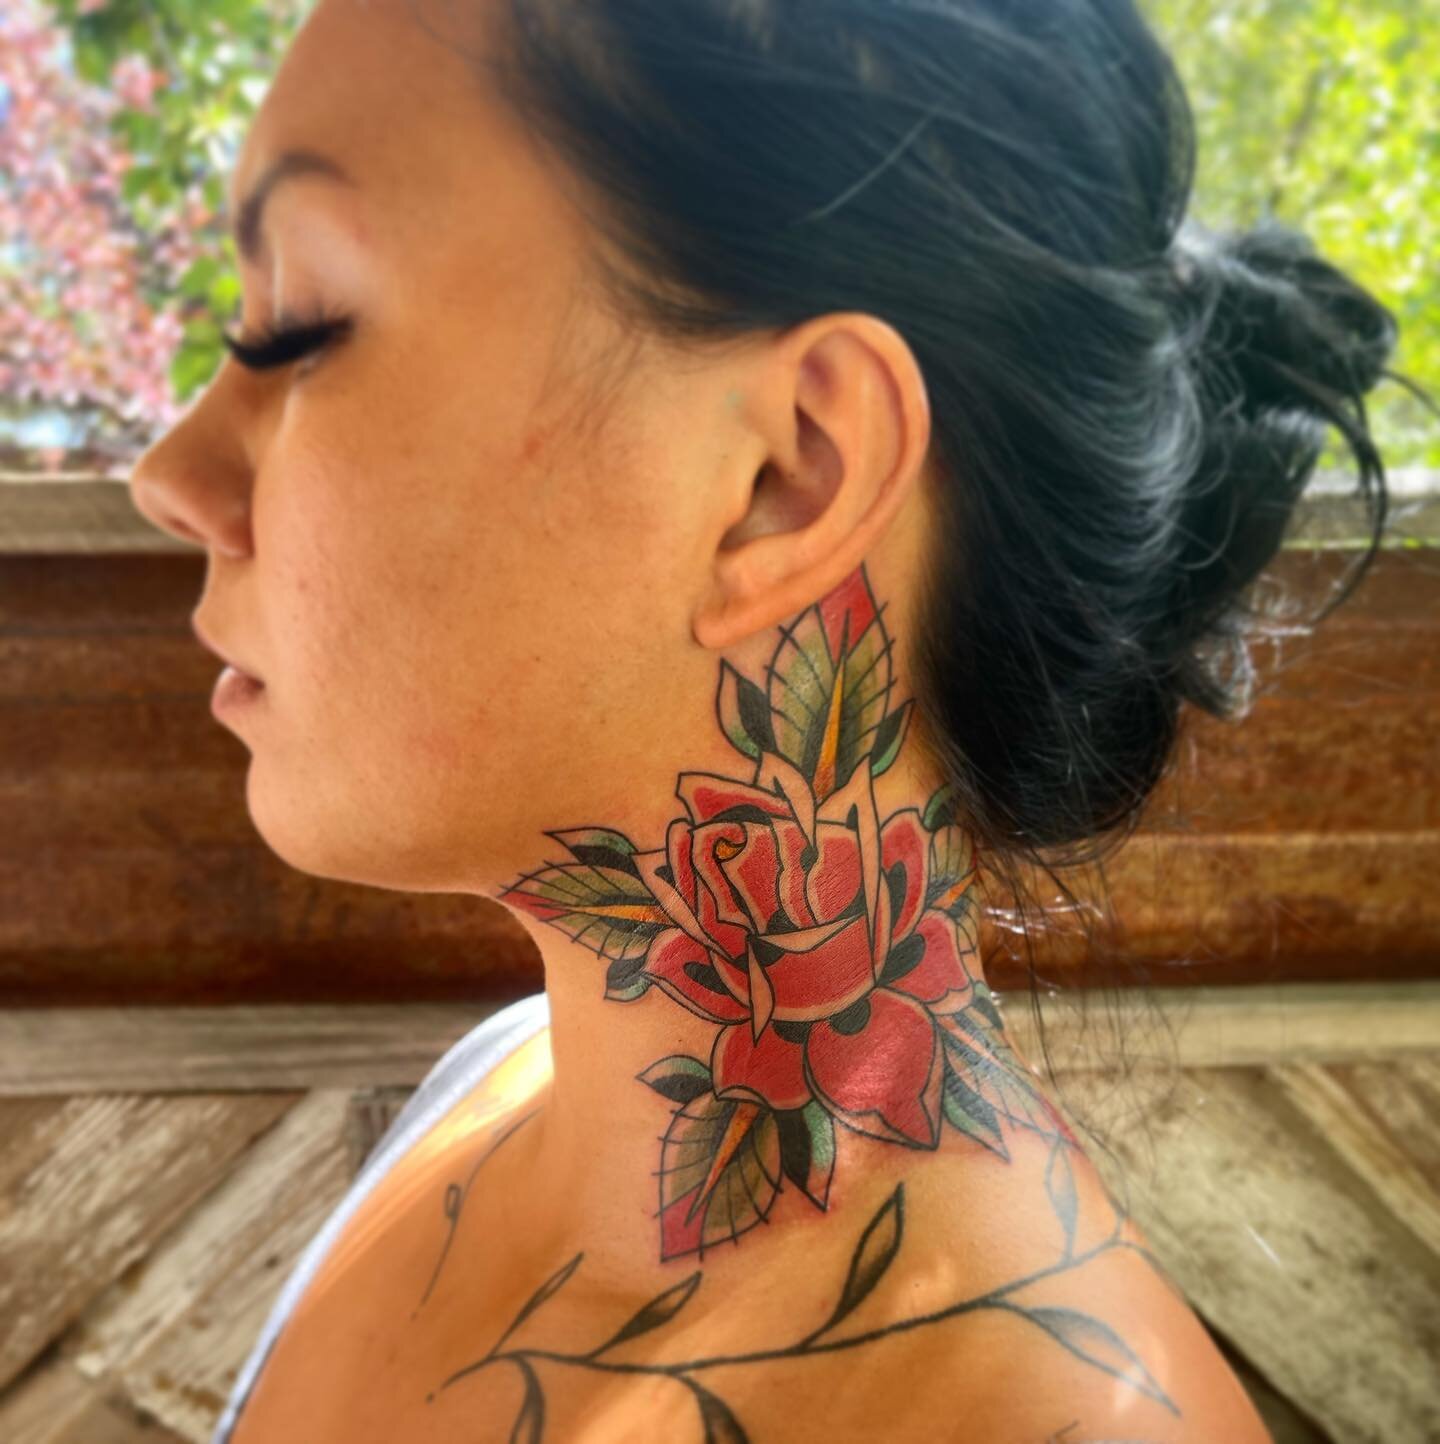 So pumped on this one from today! Necks are always a challenge but so stoked! Thanks you! 🙏🏻
.
.
#rose #rosetattoo #trad #traddaddy #traditional #traditionaltattoo #tattoo #tattoos #ink #inked #inkedgirls #redrose #necktattoo #neotrad #neotradition